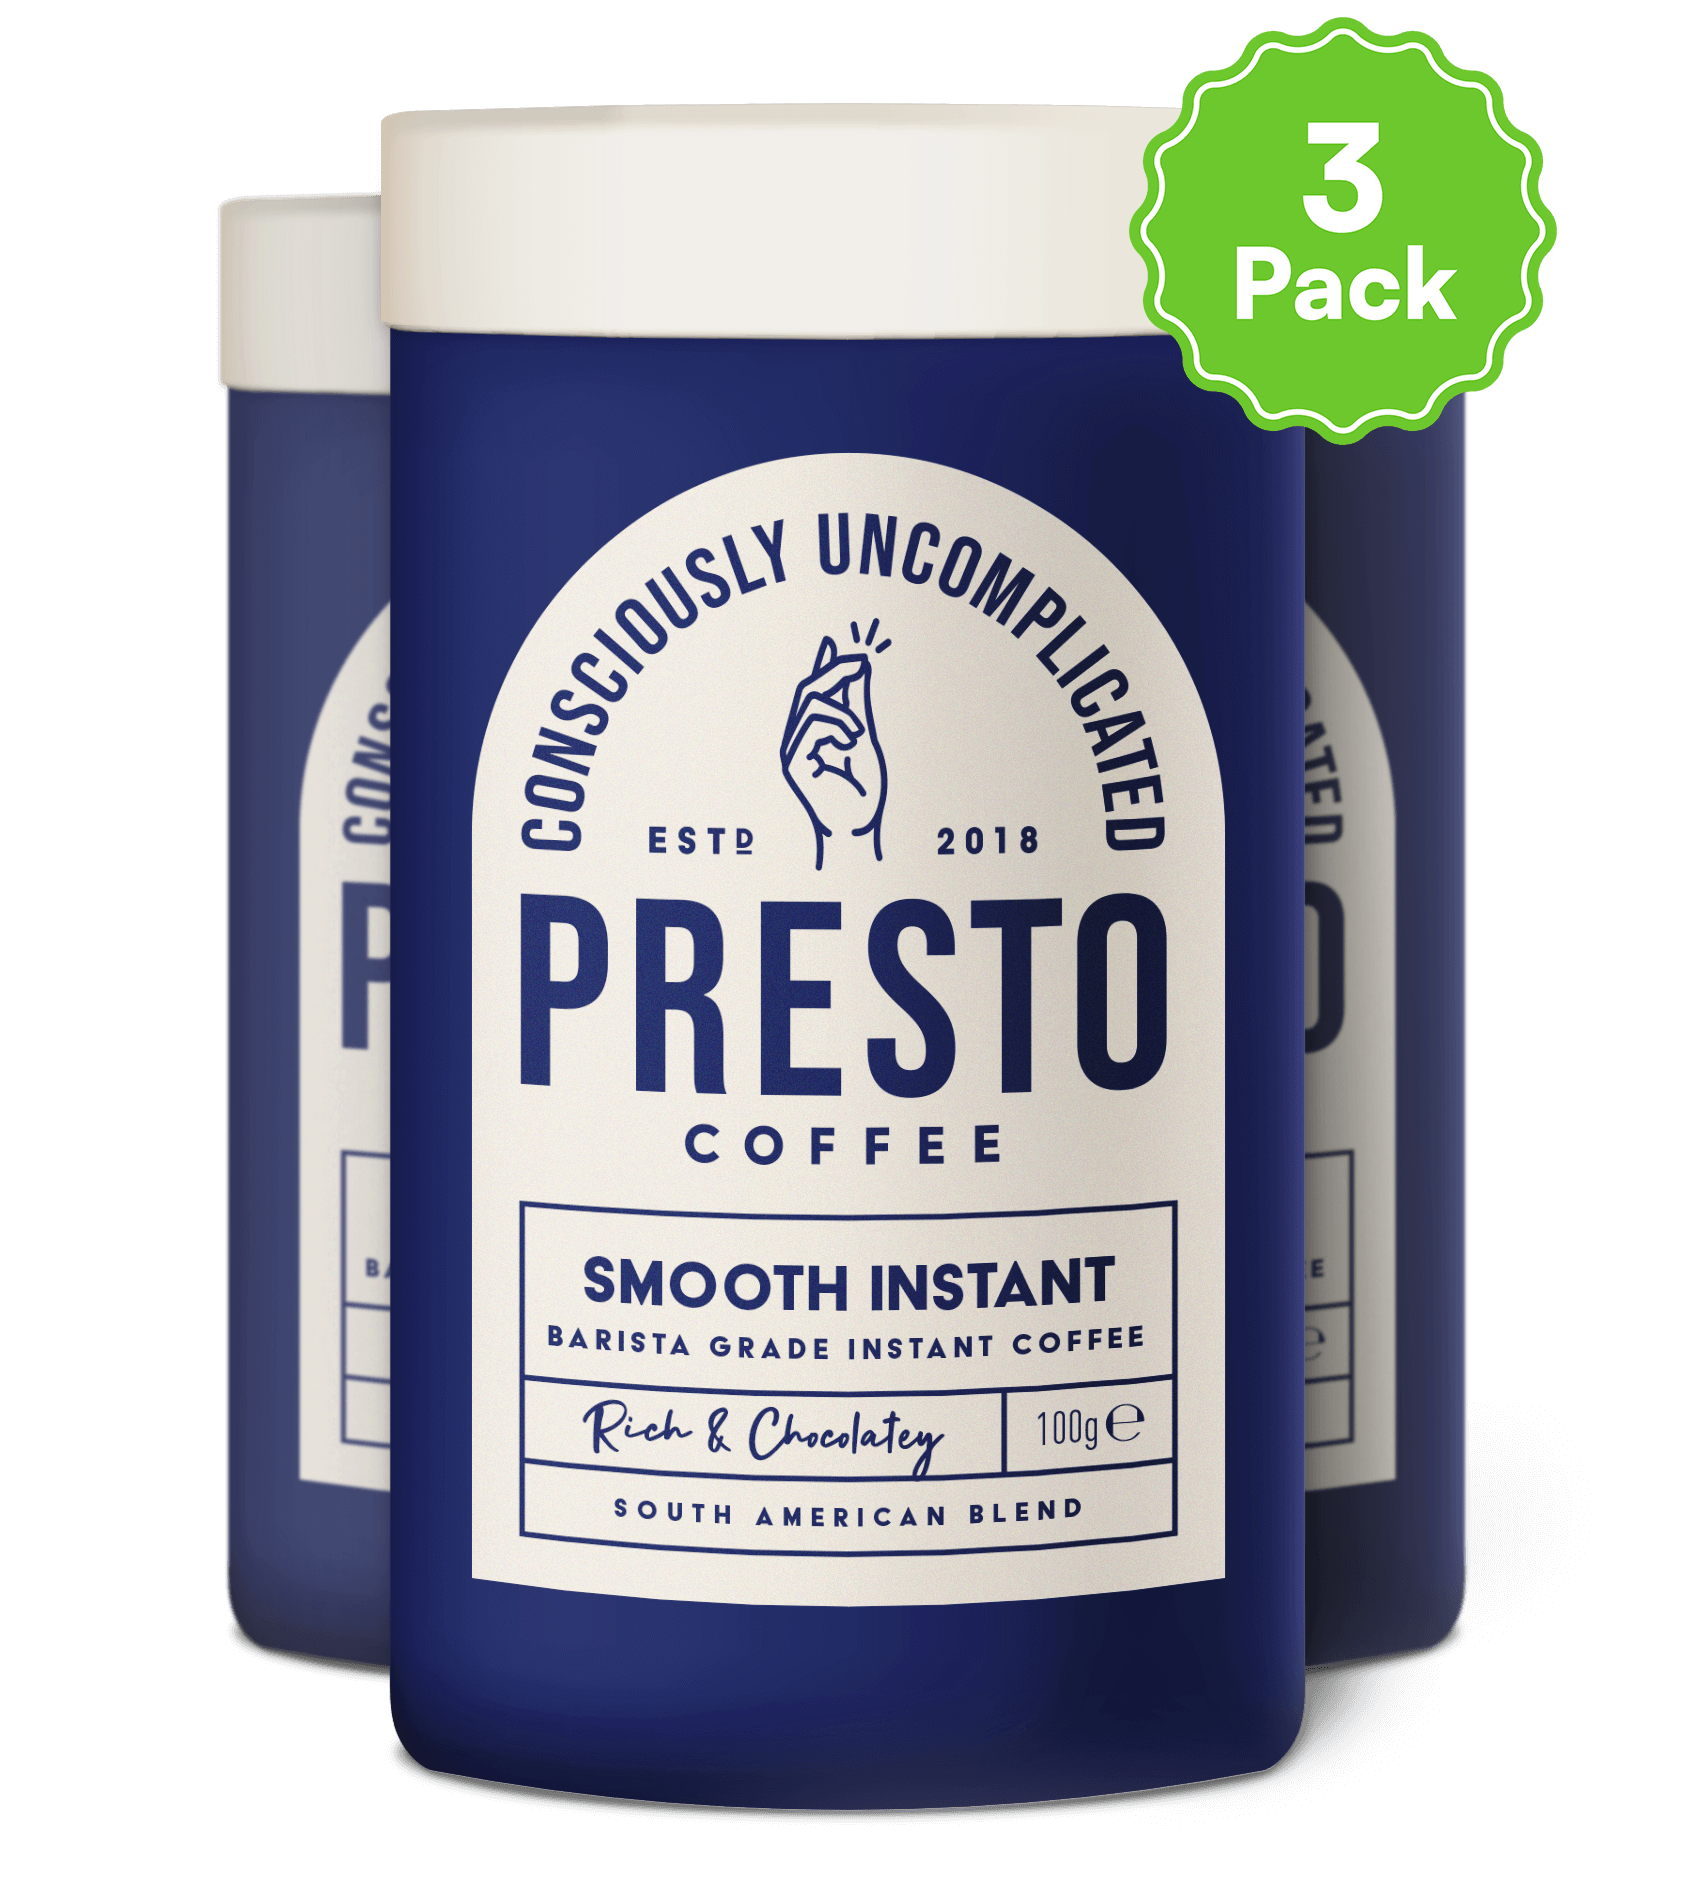 Smooth Instant Coffee Multipack (3 x 100g)